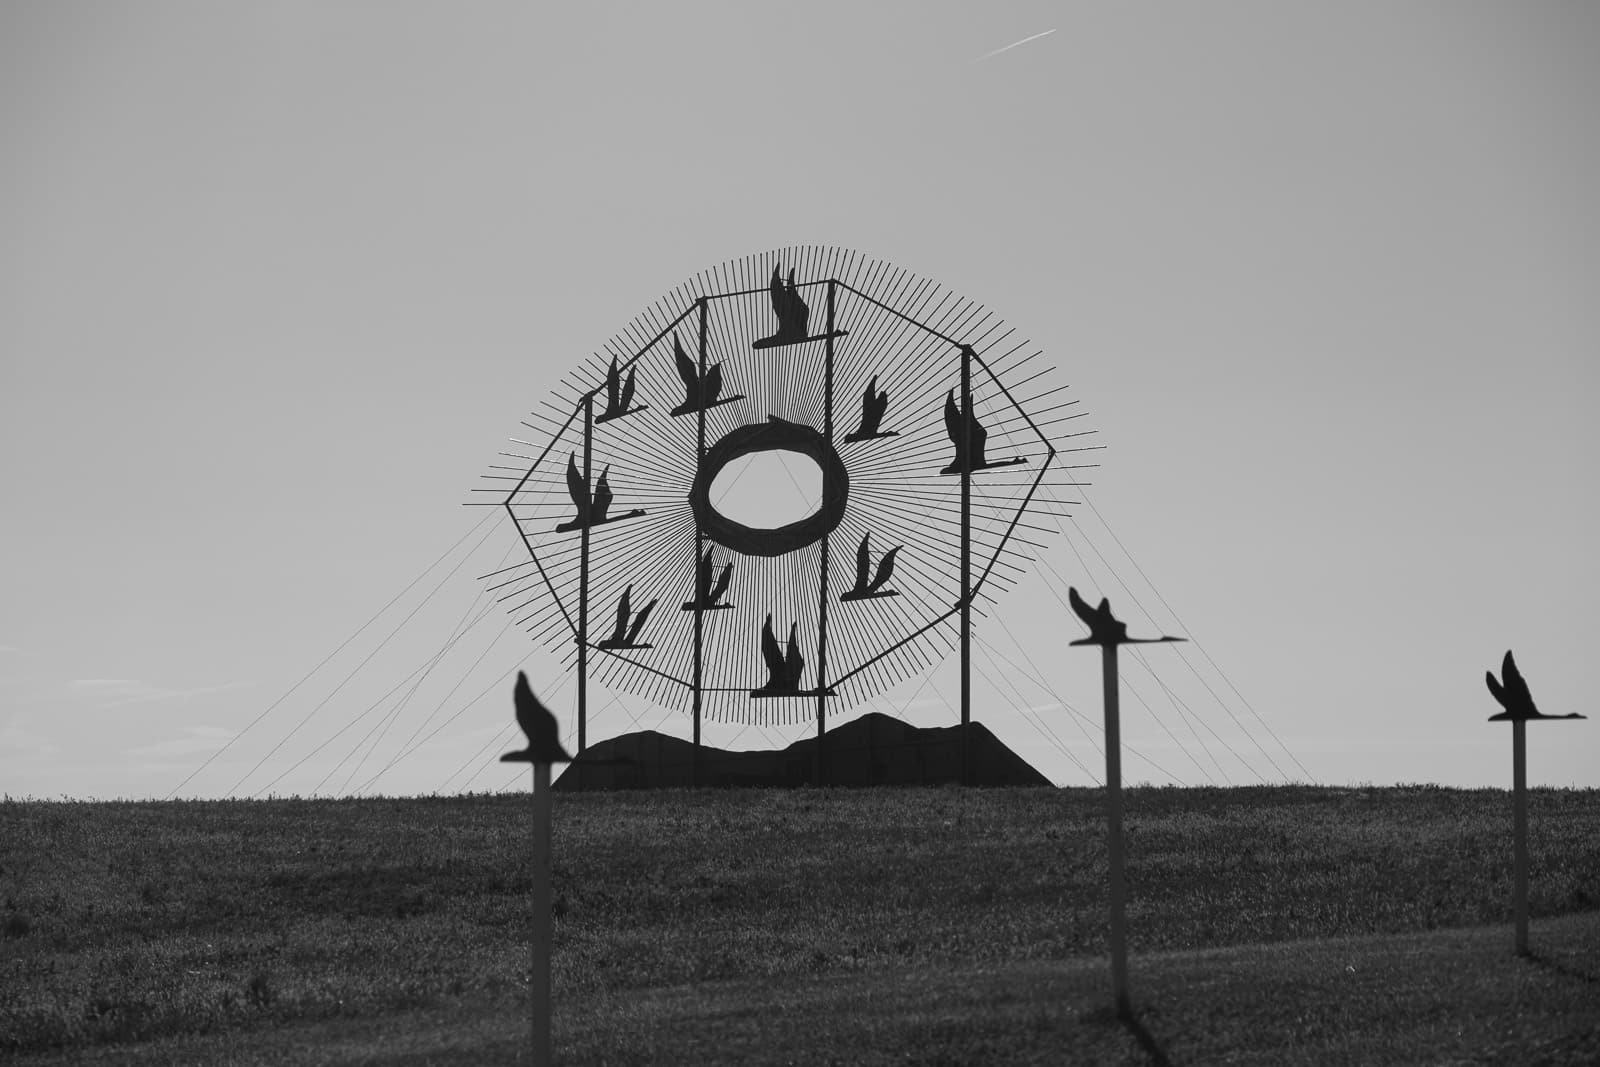 This sculpture by Gary Greff is called Geese in Flight. It is located at the Gladstone exit of I-94 and the Regent Road in North Dakota.